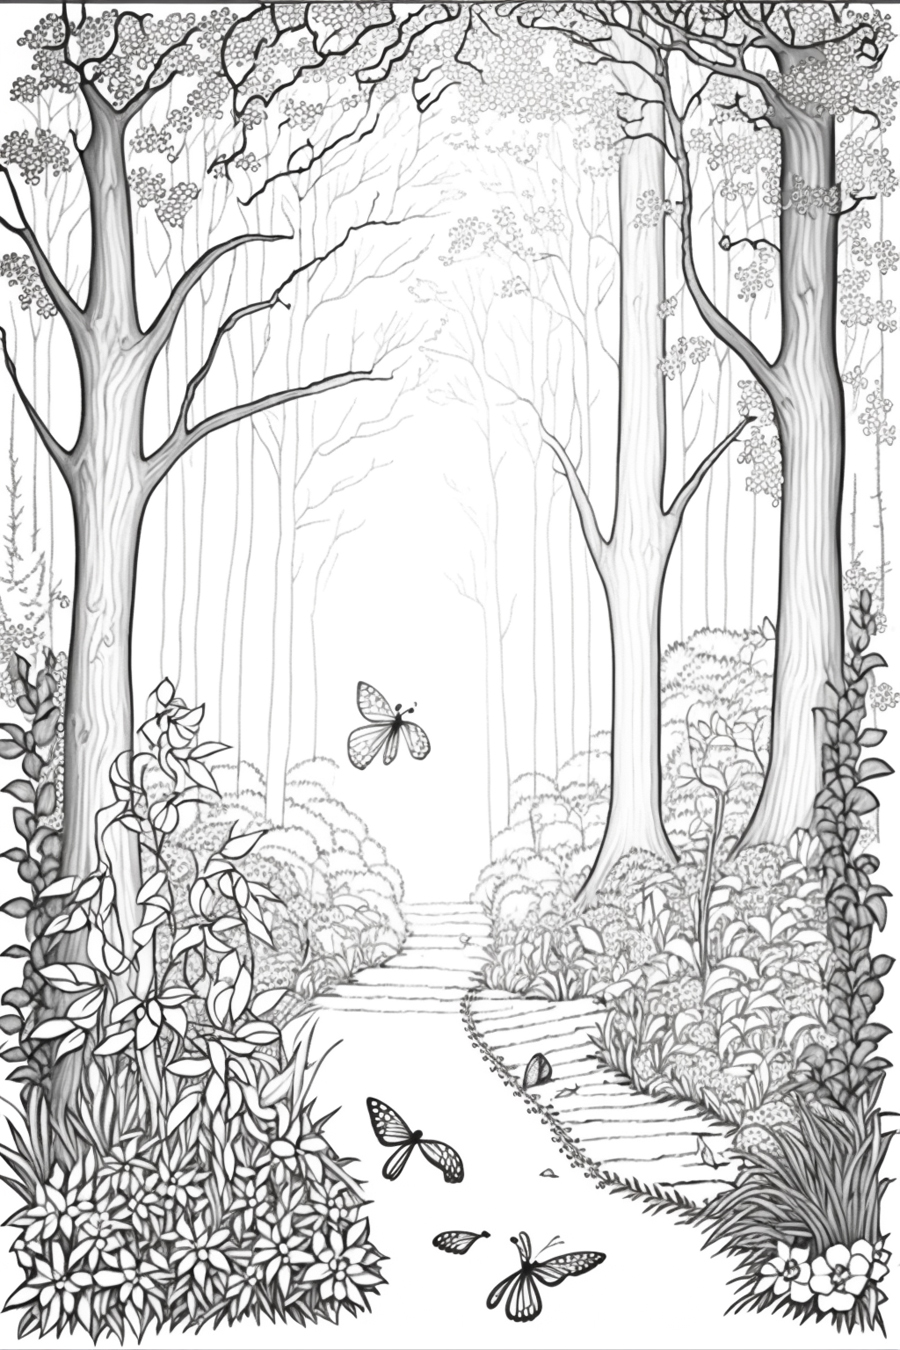 A black and white drawing of a path in the woods.